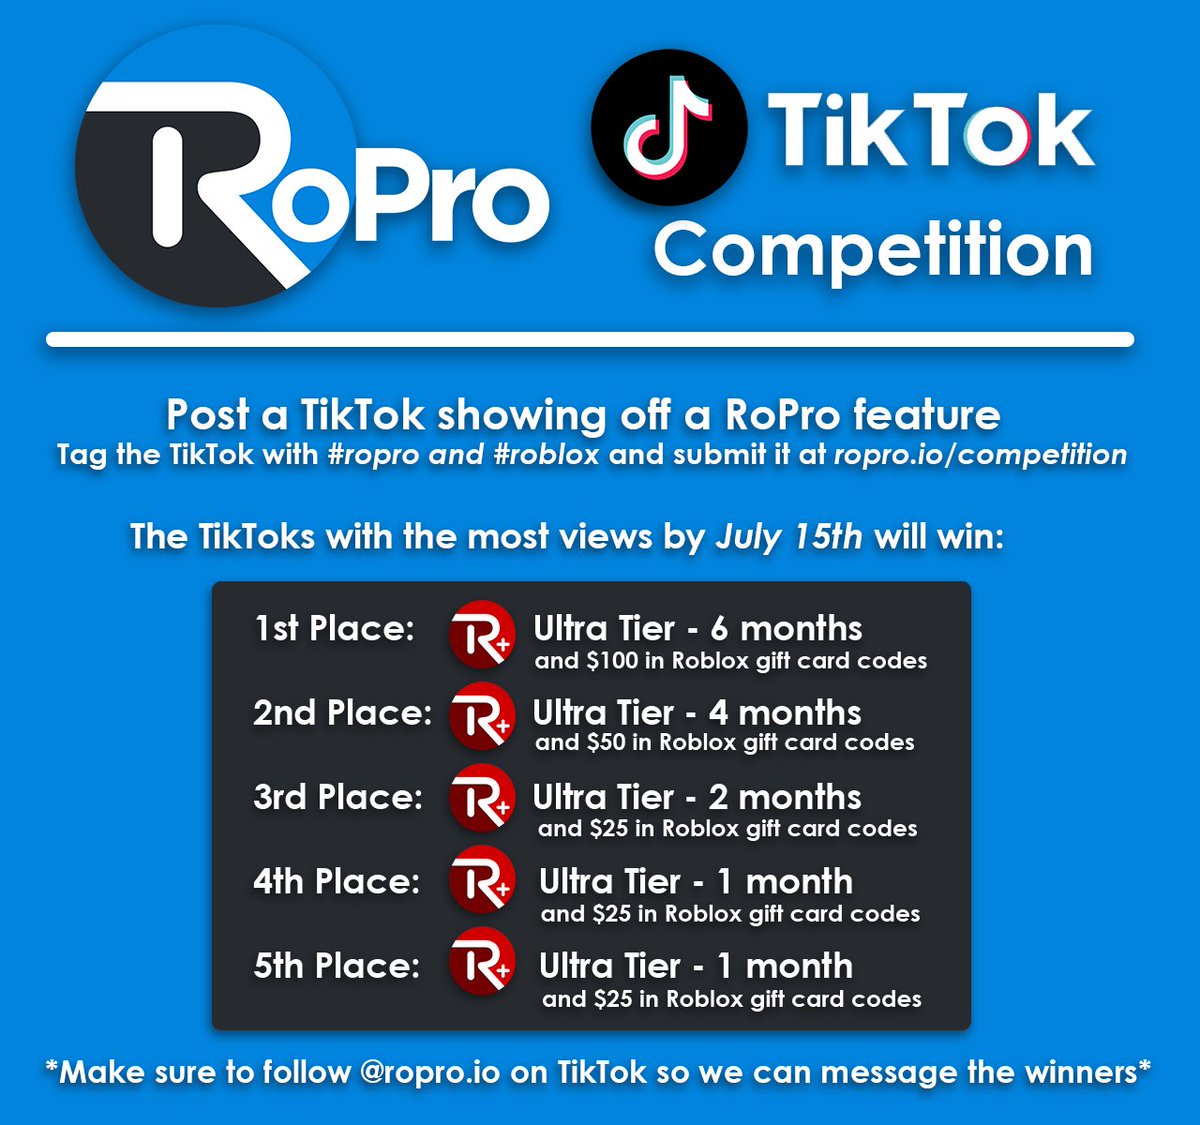 RoPro Roblox Extension on X: We are hosting a TikTok competition. TikToks  showing off any RoPro feature which get the most views by July 15th will  win up to $100 in Roblox